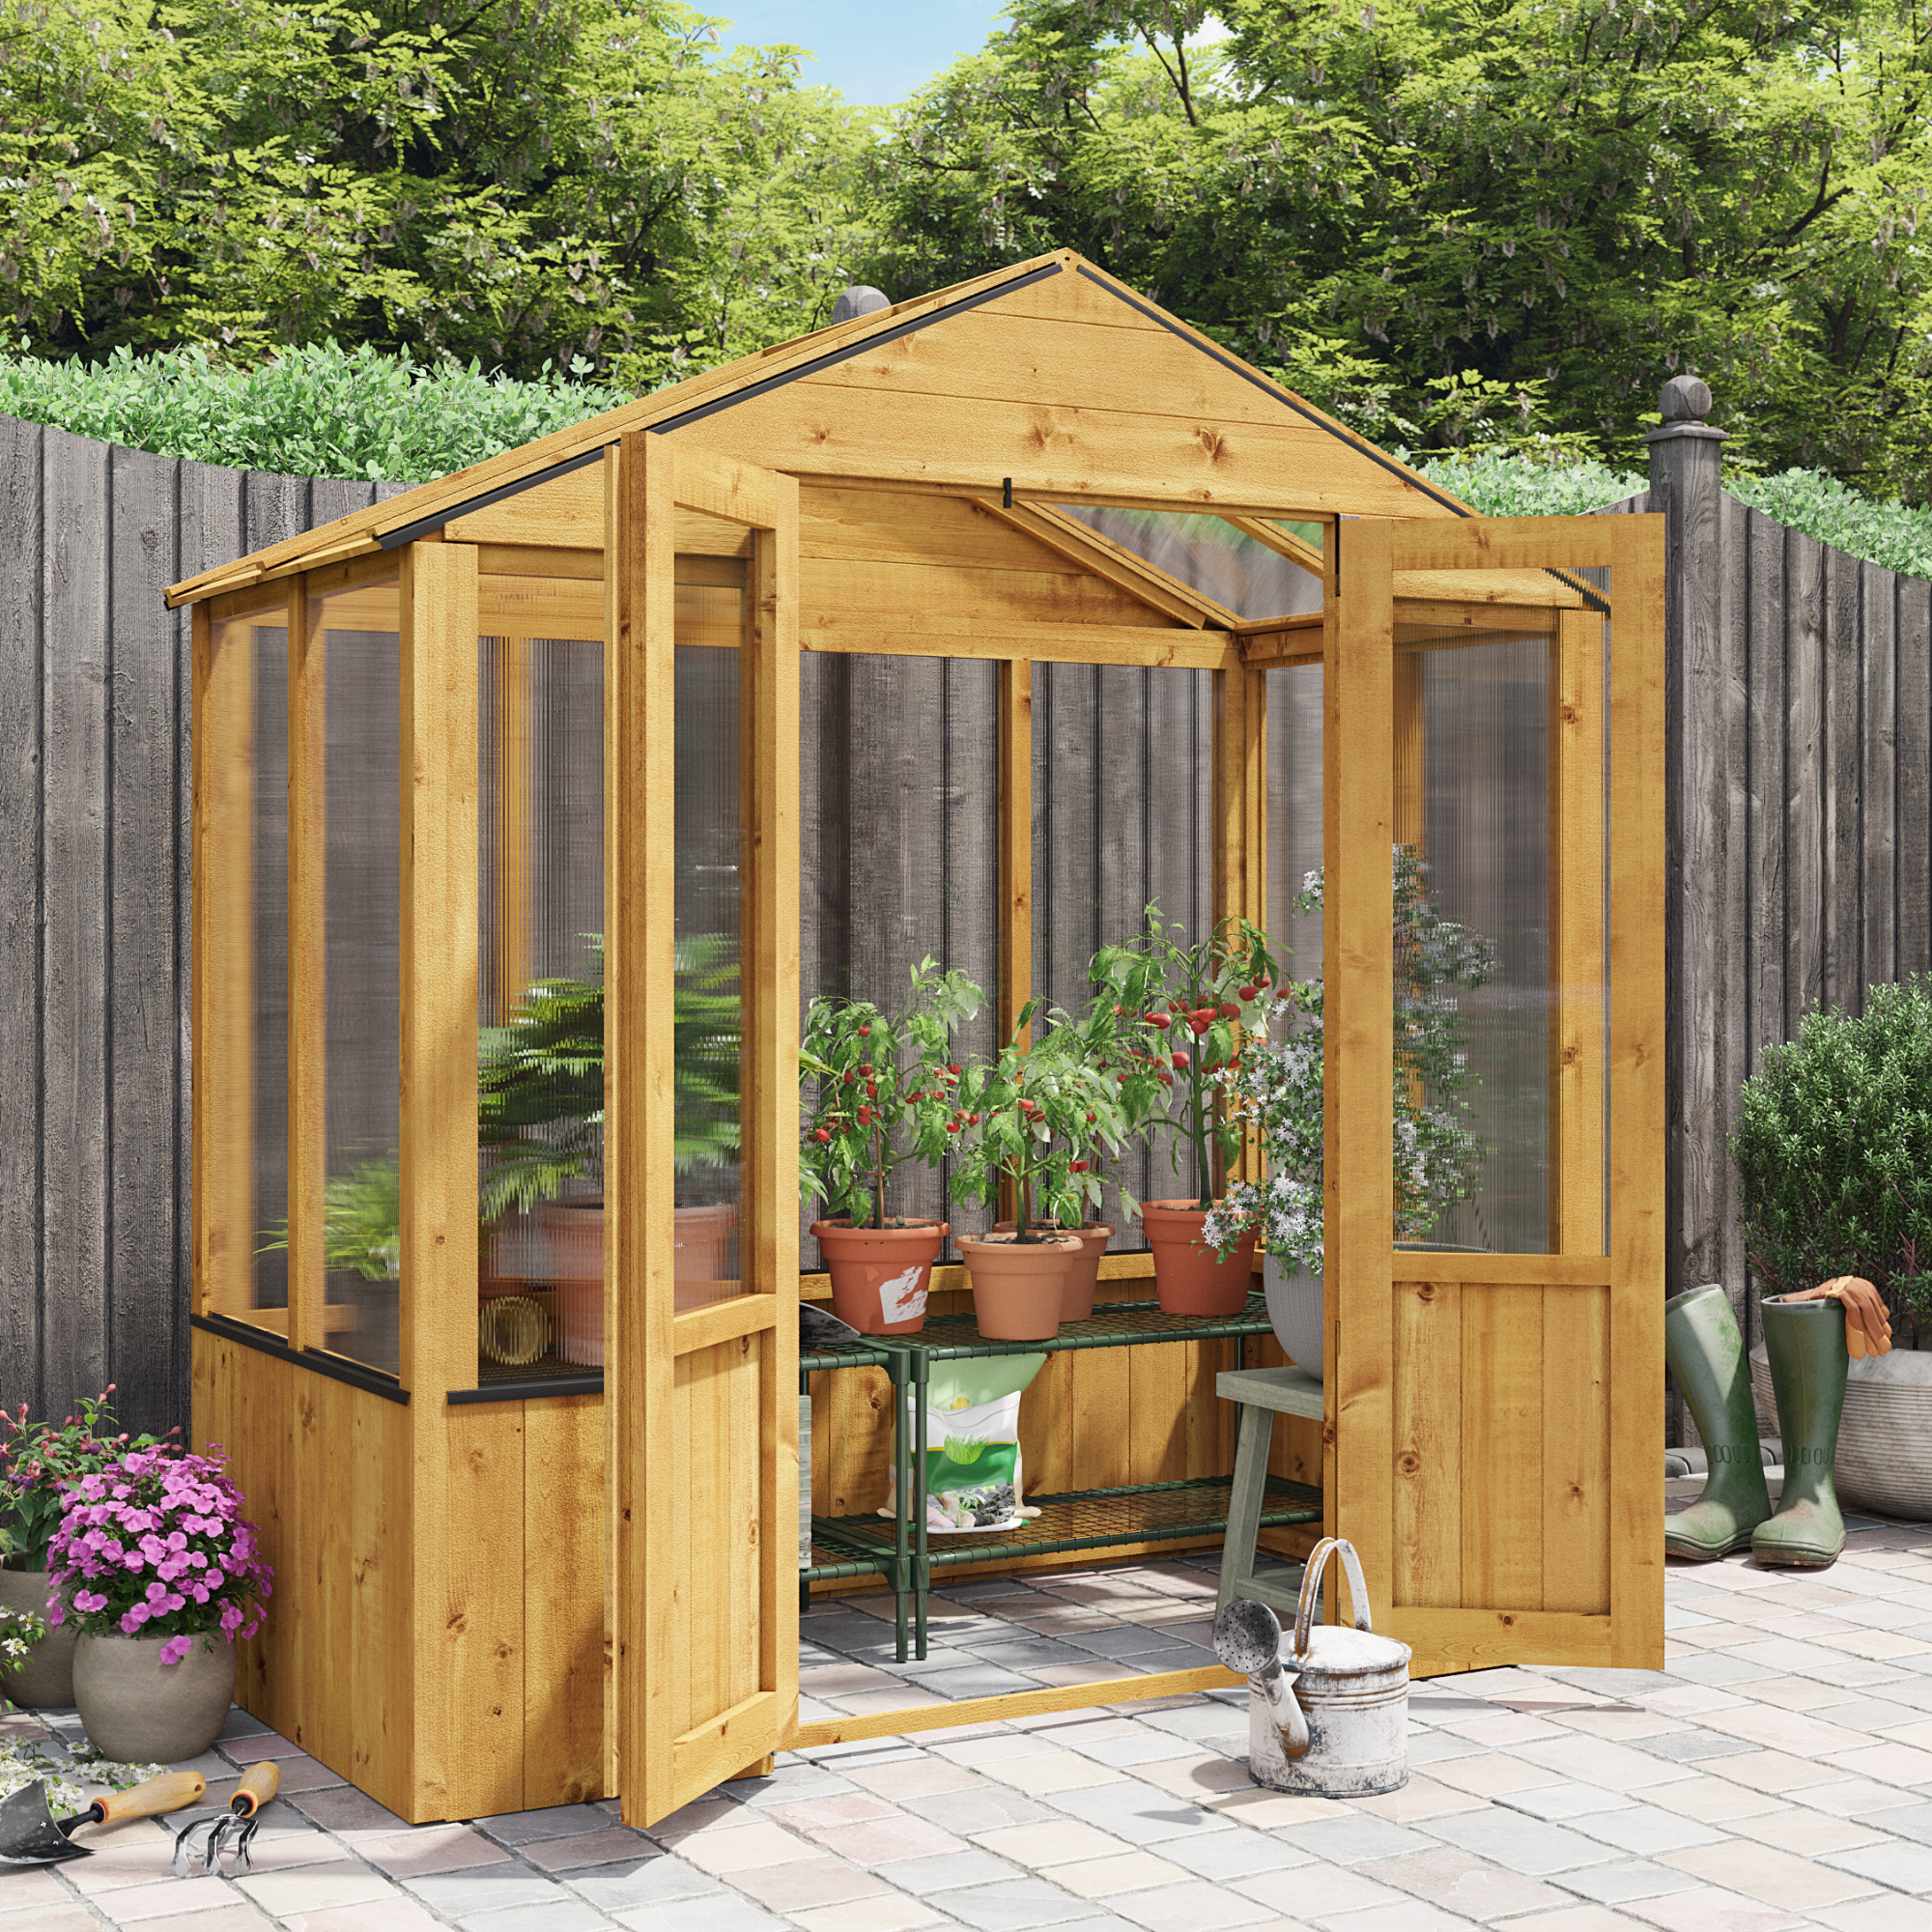 3x6 Wooden Polycarbonate Greenhouse with Opening Roof Vent | BillyOh 4000 Lincoln